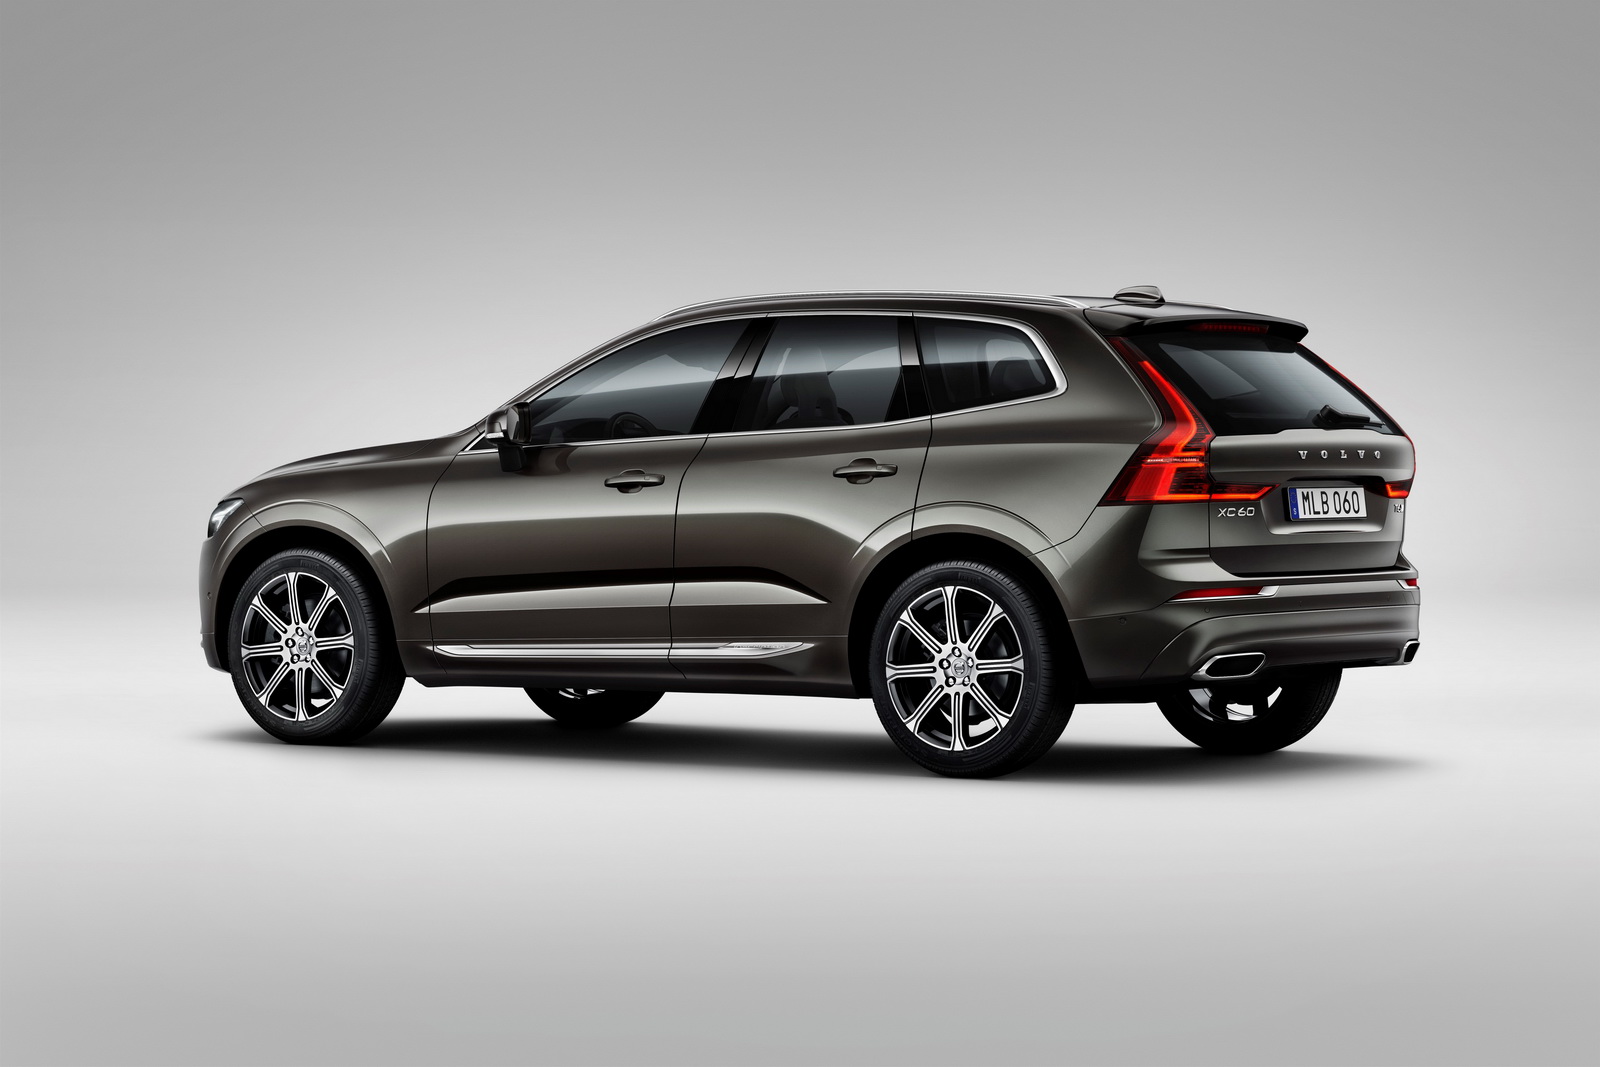 All-New Volvo XC60 Priced From £37,205 In The UK